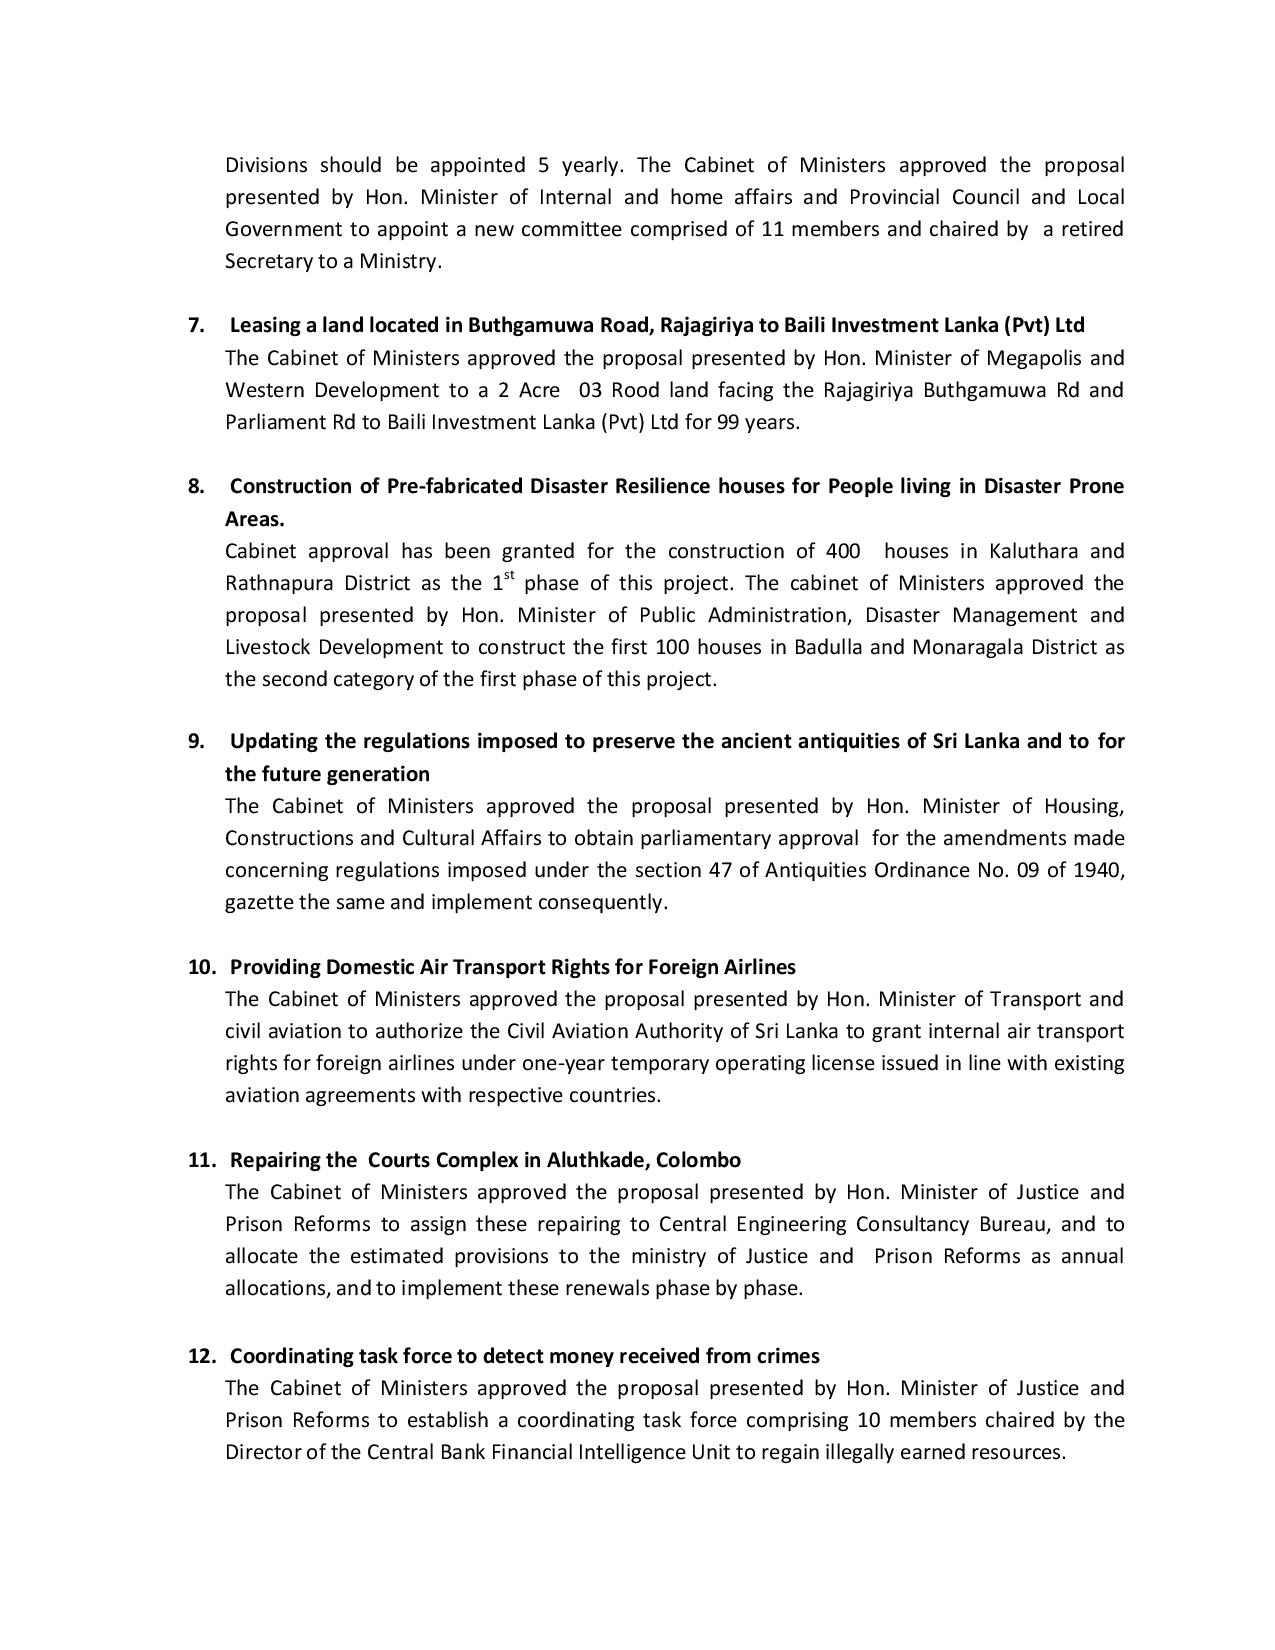 Decisions Taken by Cabinet of Ministers on theE 01.10.2019 page 002